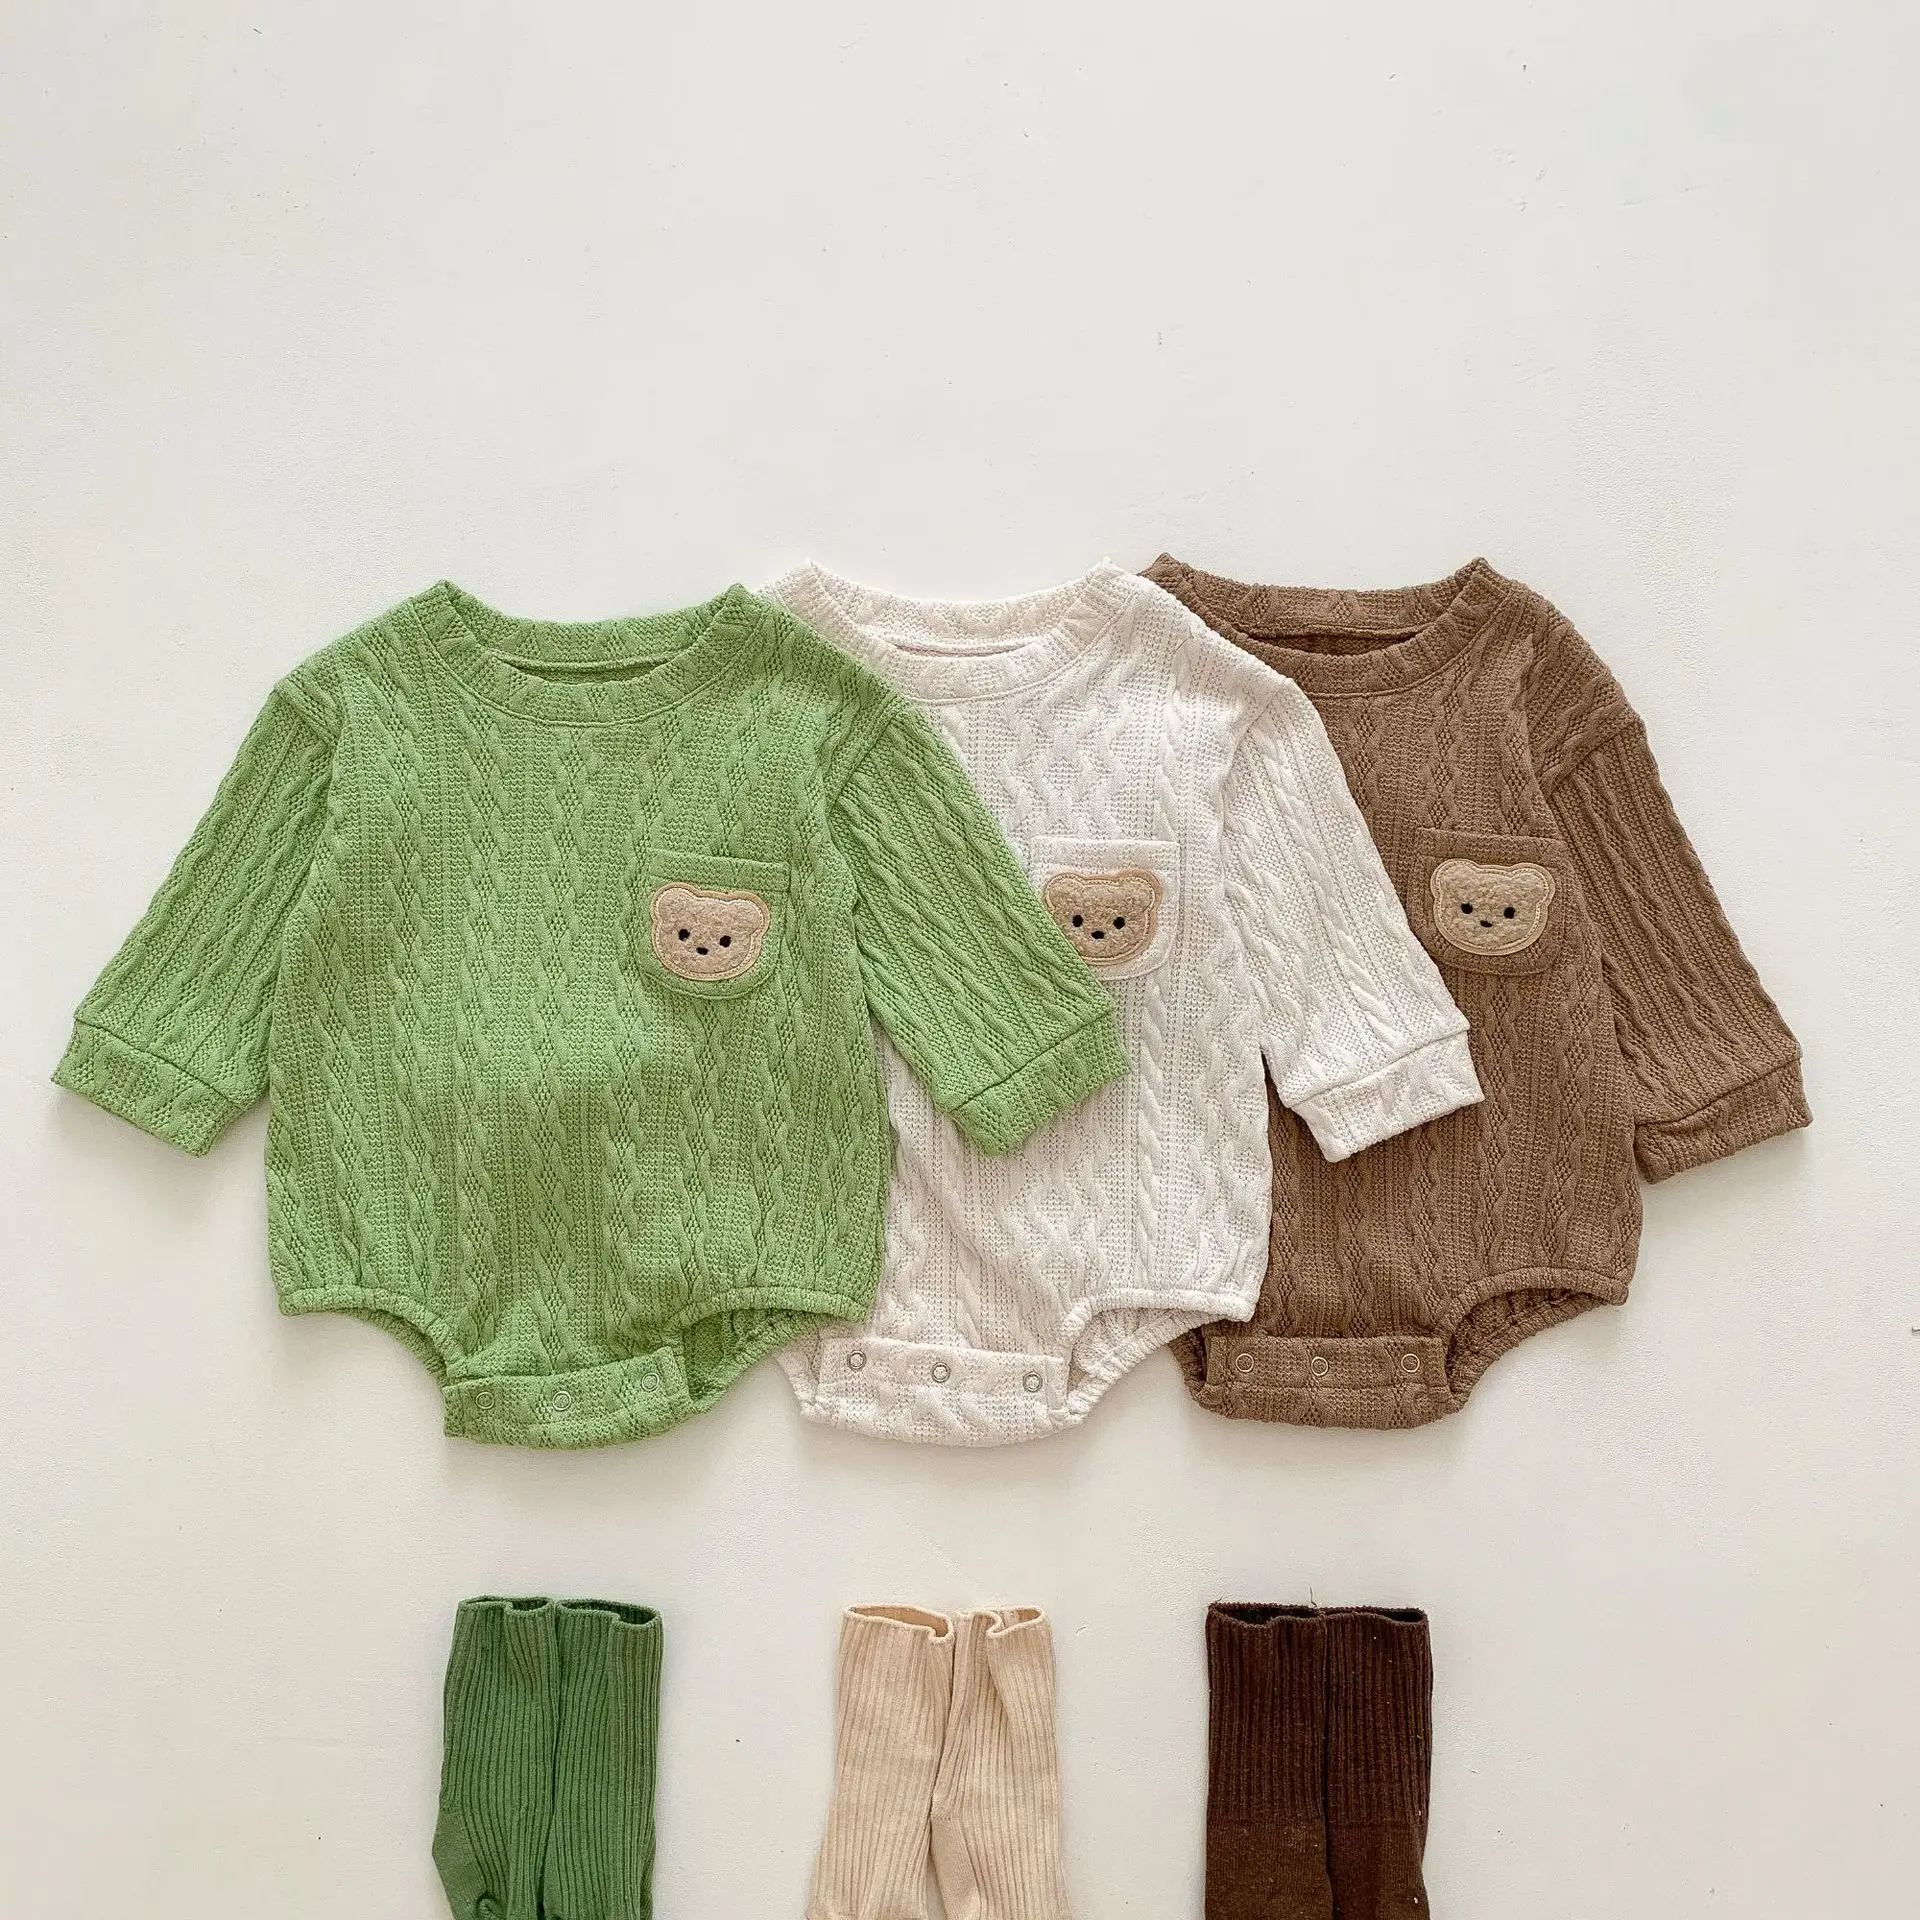 Baby One-piece Clothes, Cute Bear Head Work Clothes For Boys And Girls, Spring And Autumn Newborn Pants